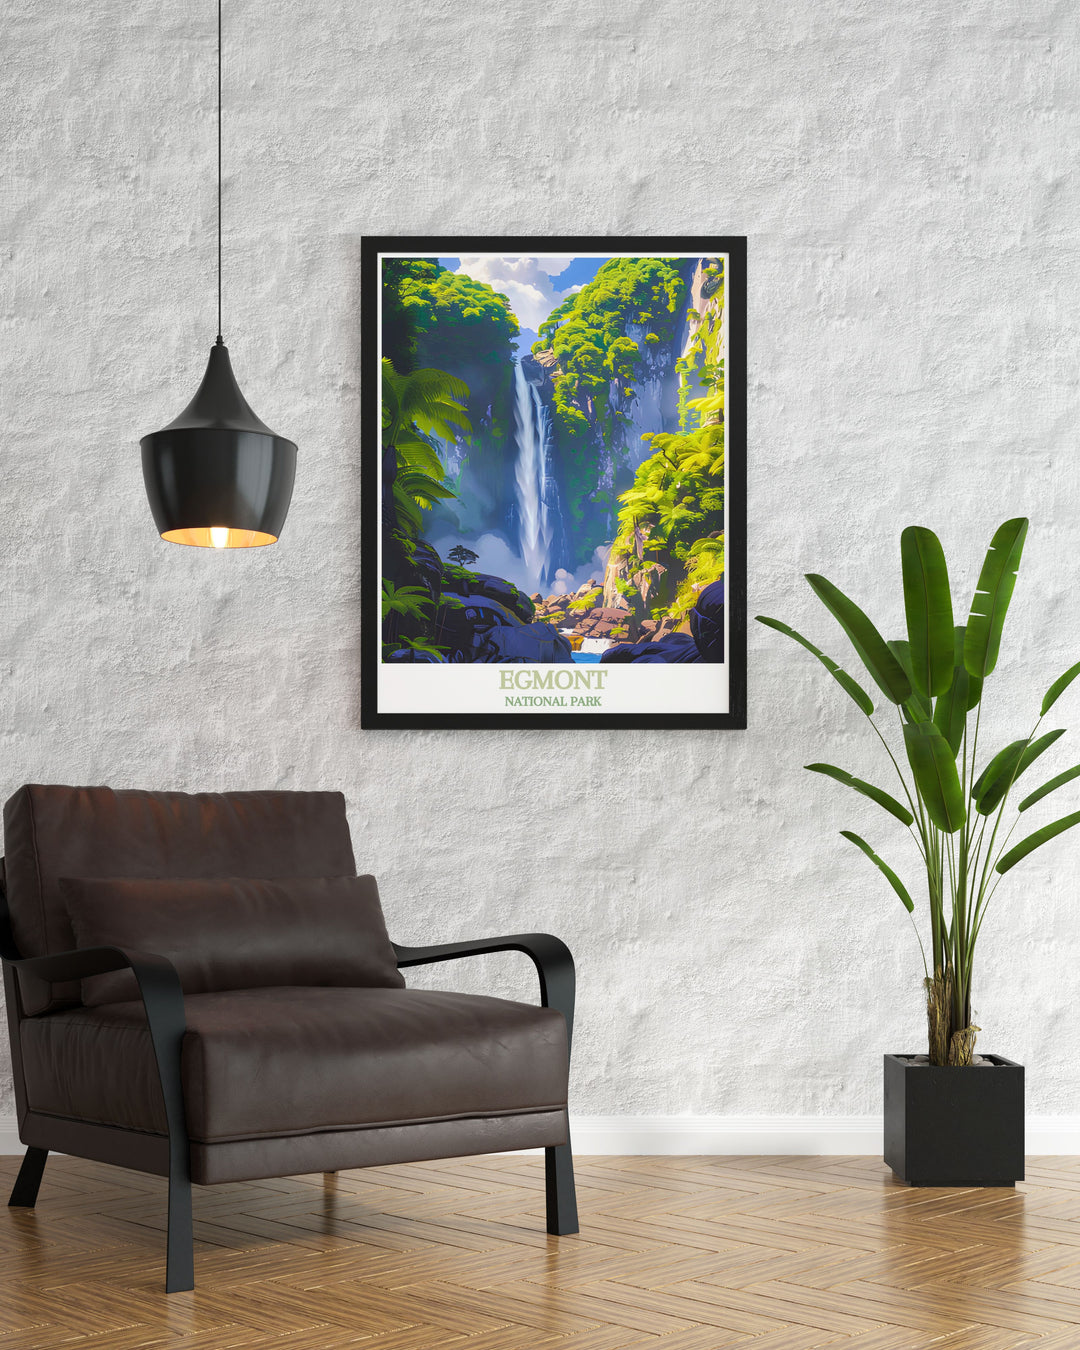 Framed art of Dawson Falls, illustrating the peaceful ambiance and natural beauty of this picturesque waterfall in New Zealand.